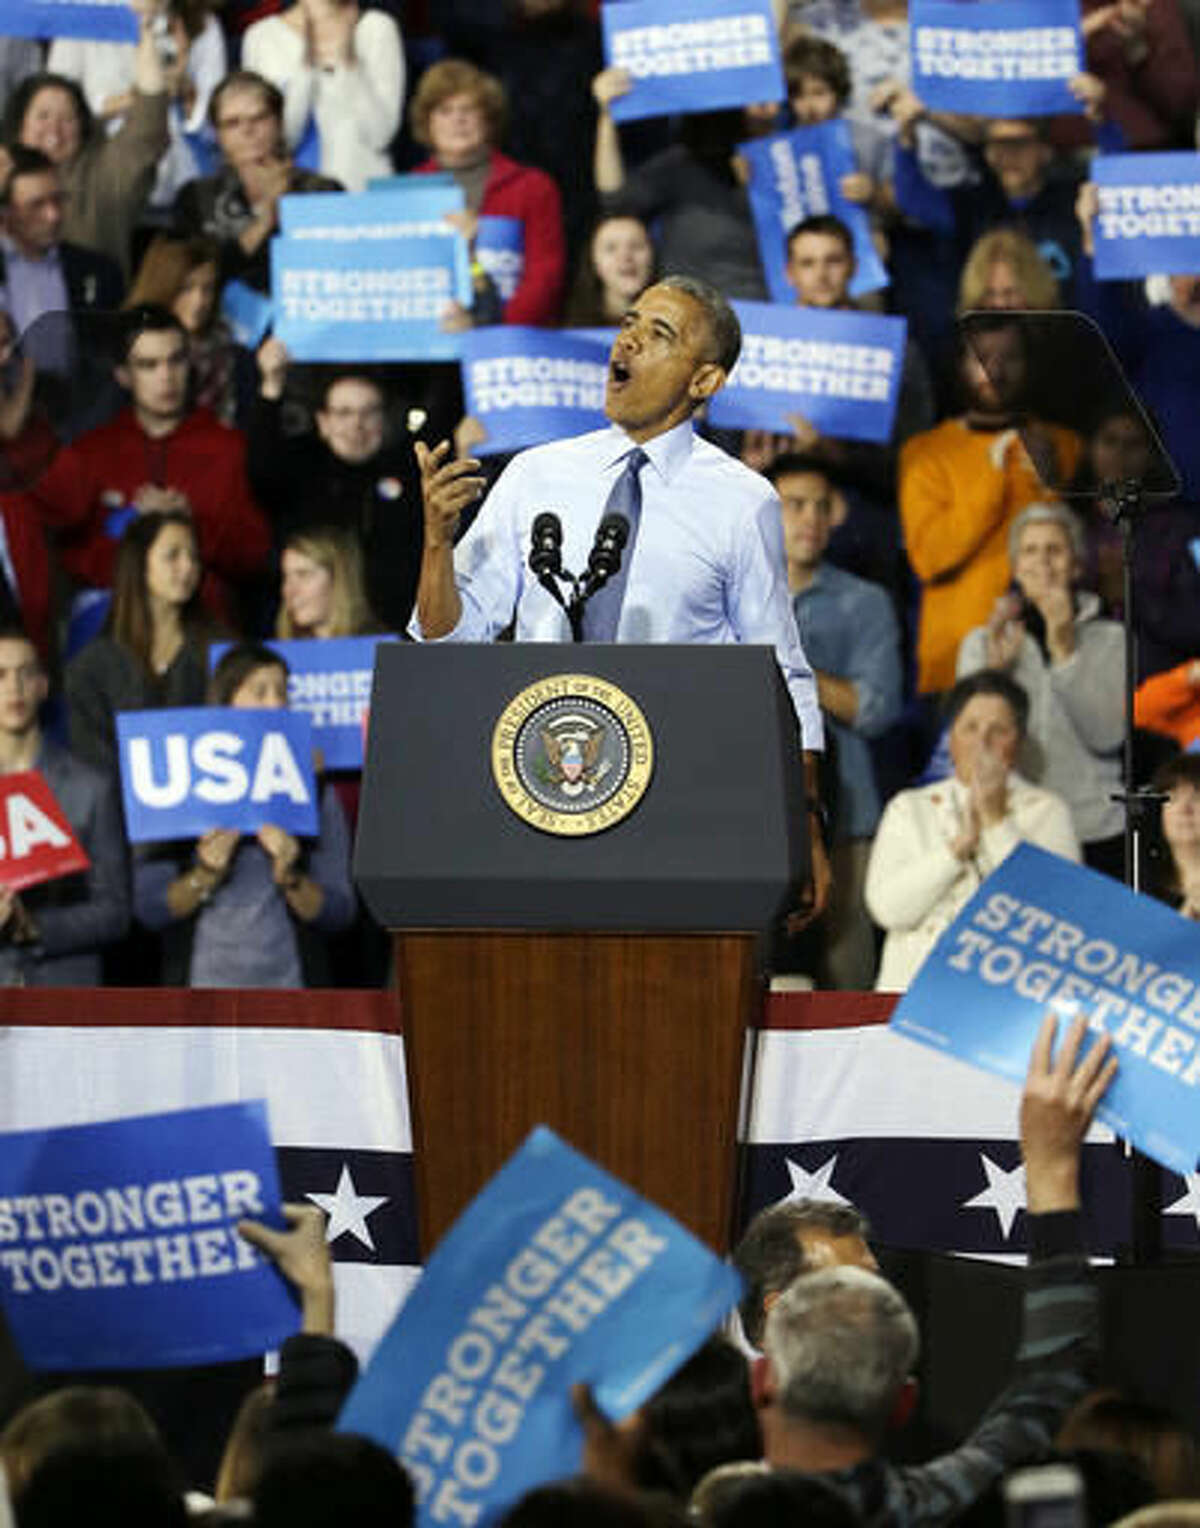 President Barack Obama speaks at a campaign event for Democratic presidential candidate Hillary Clinton at the University of New Hampshire, Monday, Nov. 7, 2016, in Durham, N.H. (AP Photo/Elise Amendola)